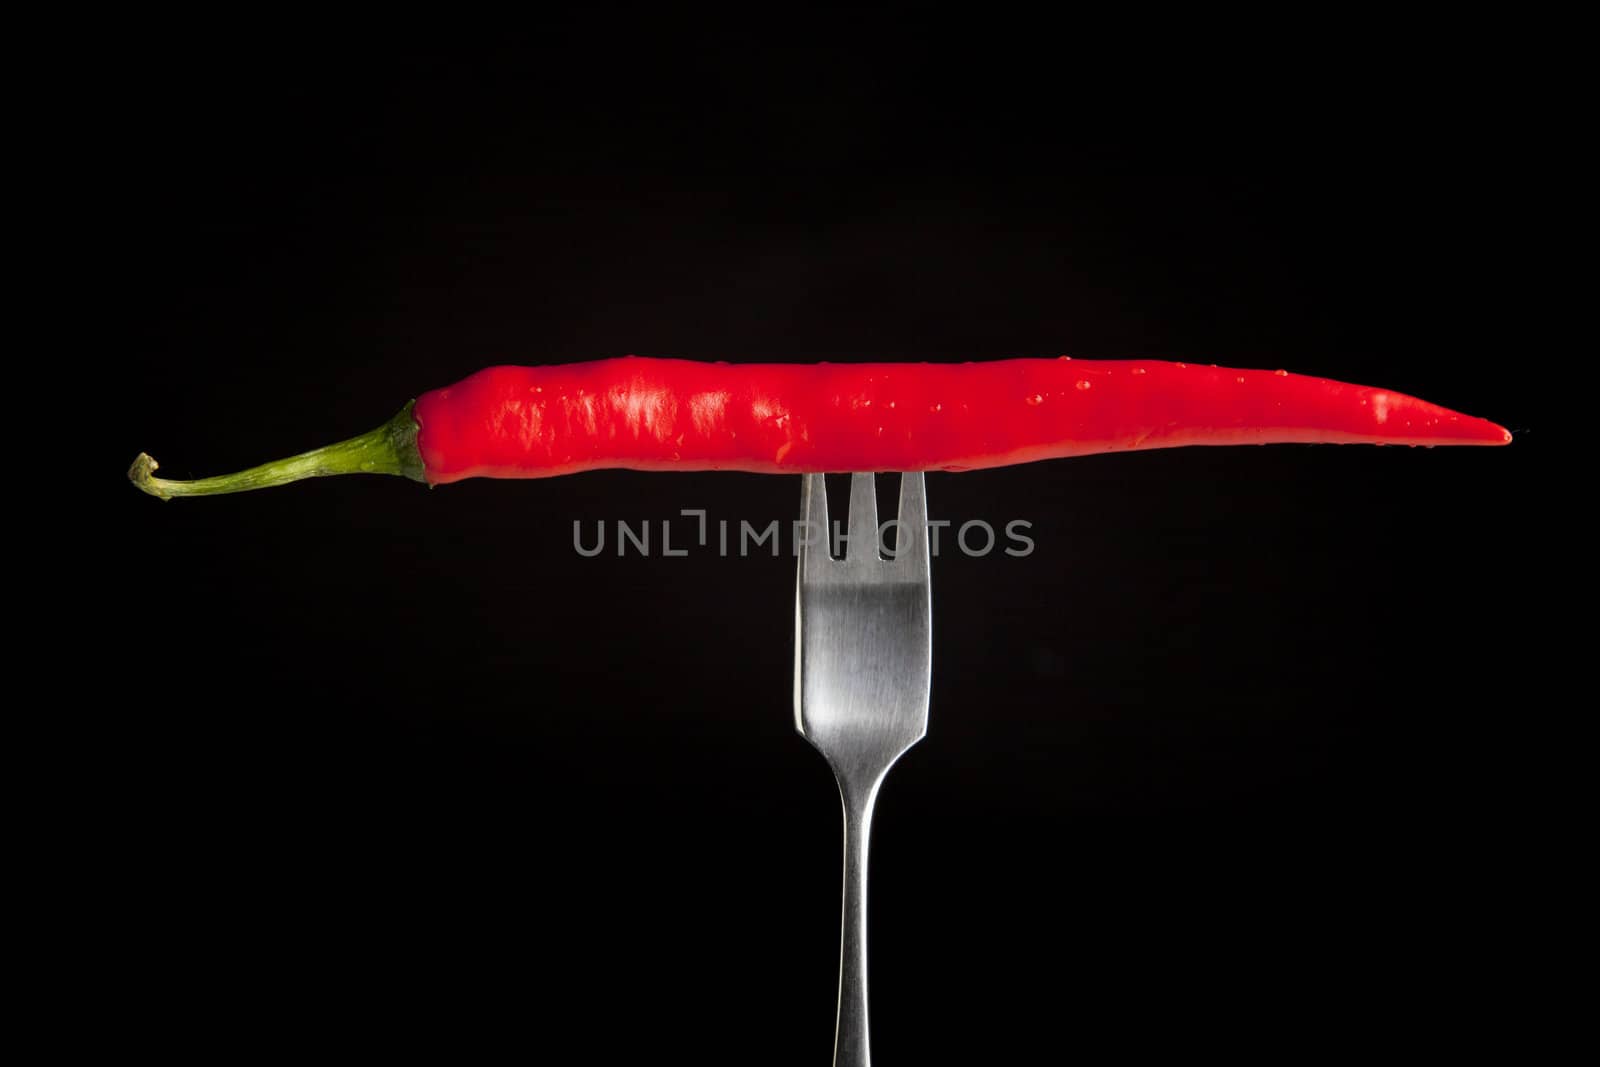 Hot chili pepper on fork with black background